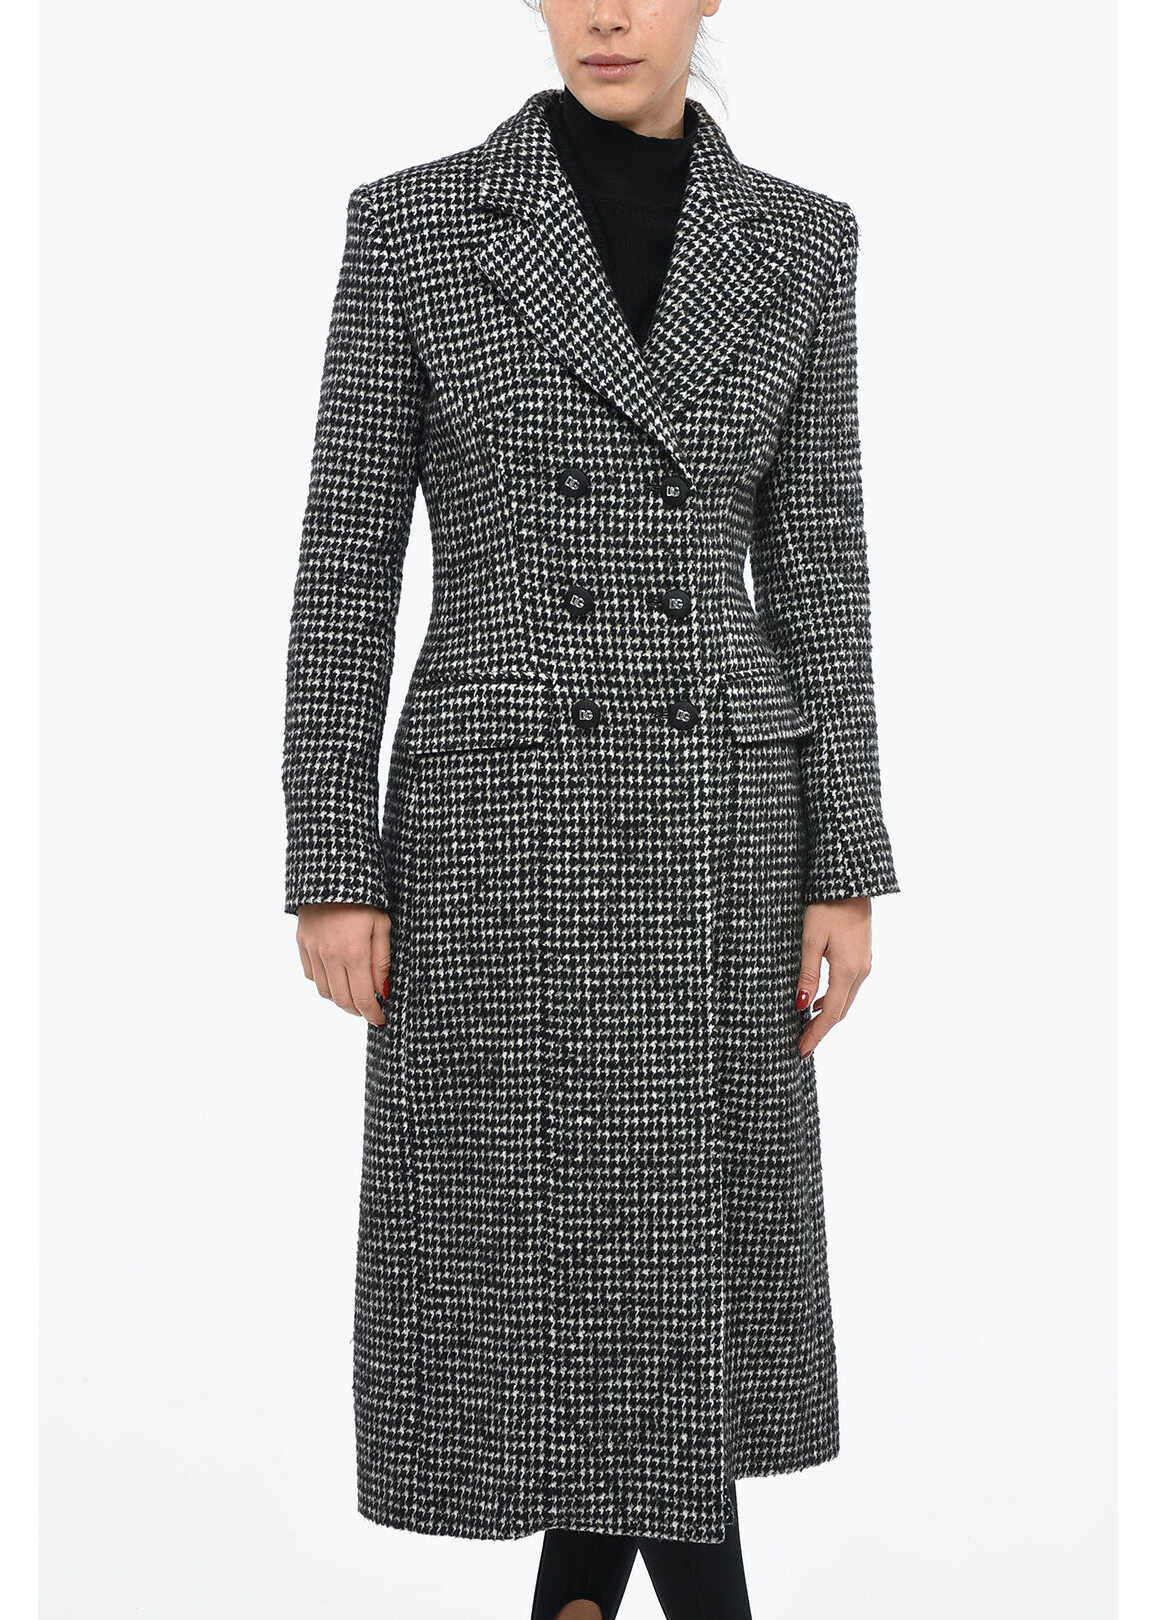 Dolce & Gabbana Houndstooth Patterned Slim Fit Coat With Logoed Buttons Gray